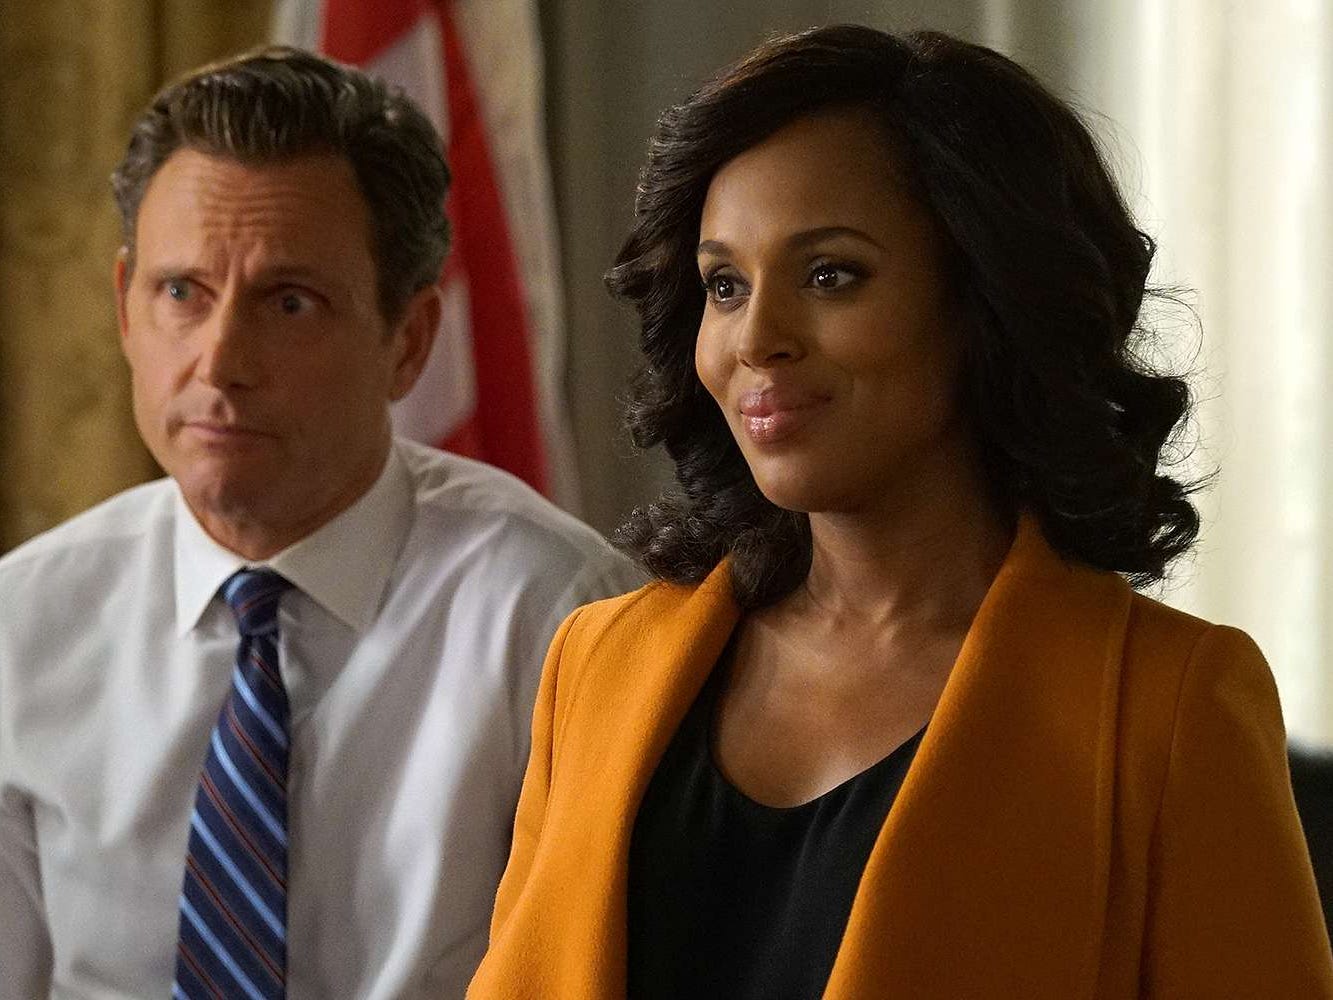 <p><strong>Summary: </strong>Olivia Pope (Kerry Washington) is a former White House employee who started her own crisis management firm. Her firm works closely with the White House, bringing her closer to her former employer, President Fitzgerald Grant III (Tony Goldwyn).</p><p><strong>Why you'll like it: </strong><a href="https://www.insider.com/shonda-rhimes-showrunner-creator-queen-charlotte-bridgerton-2023-4">Shonda Rhimes</a>, an executive producer of the main "Bridgerton" series, had a more active role with "Queen Charlotte" as its showrunner and writer. This is likely why the miniseries felt more sincere and profound than the main series. If you loved "Queen Charlotte," you will quickly become a fan of Rhimes' best work, <a href="https://www.insider.com/scandal-secrets-fun-facts-2018-9">"Scandal."</a></p><p>"Scandal" is streaming on Hulu.</p>